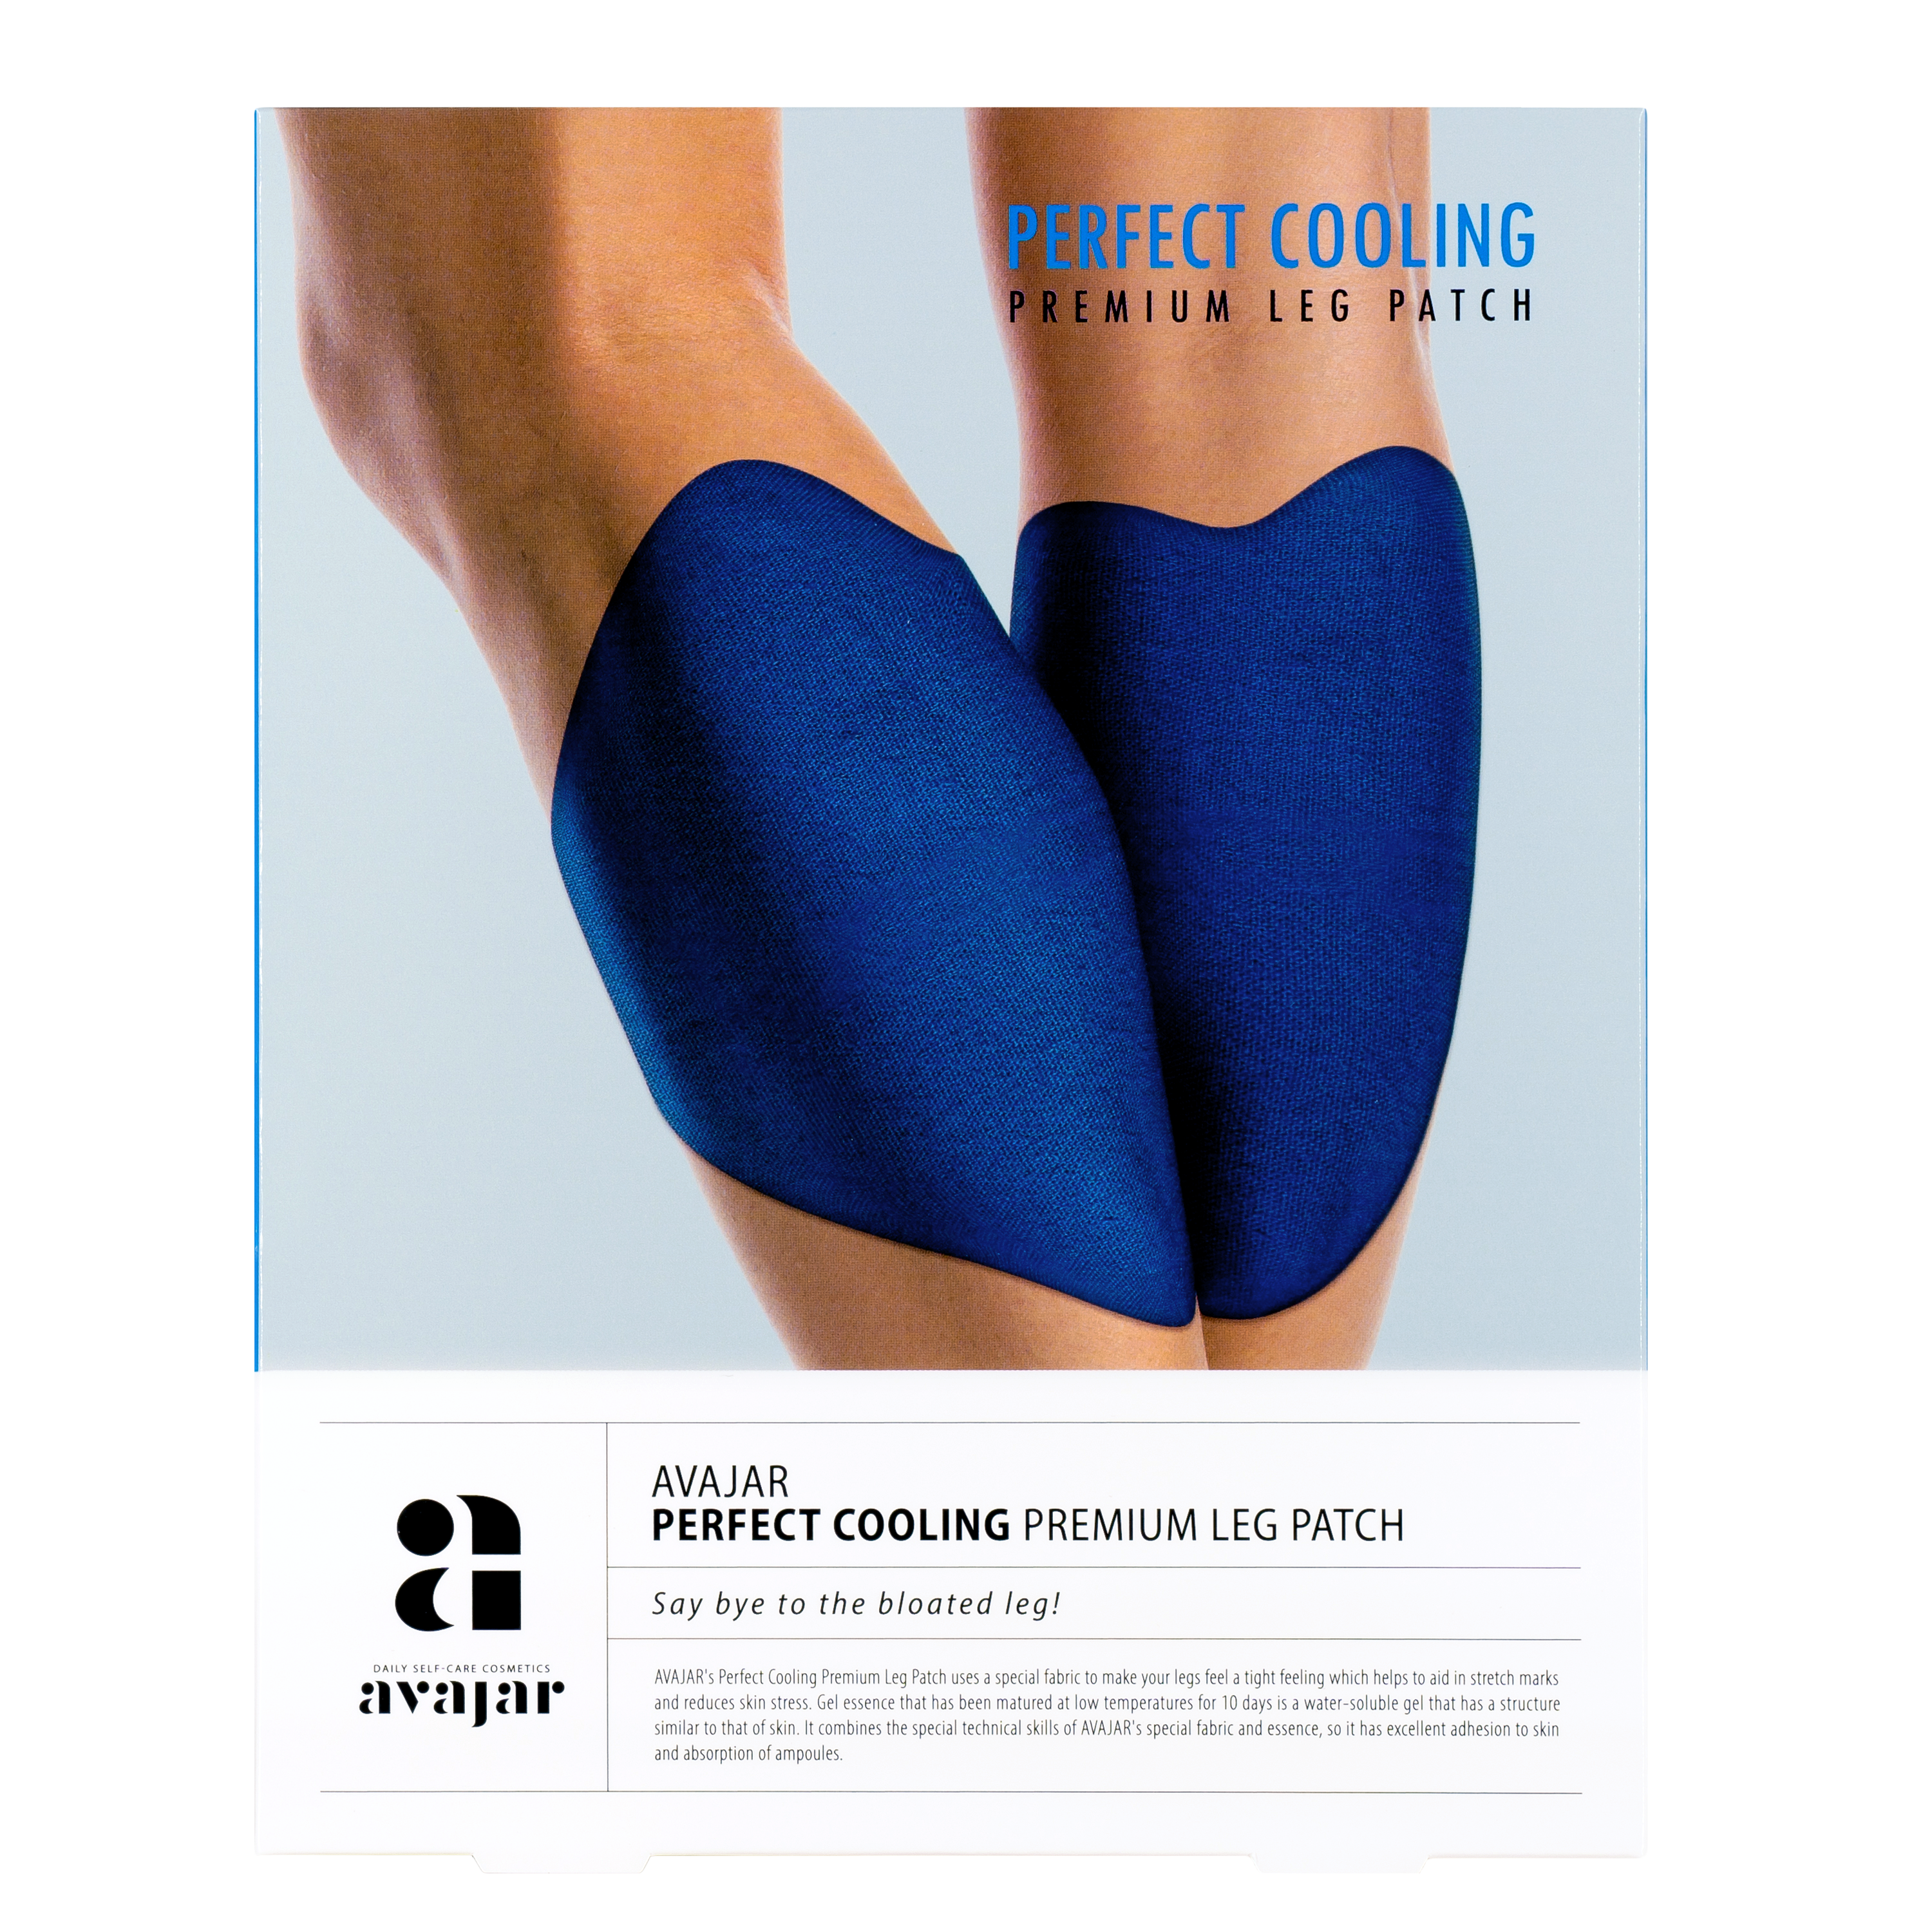 AVAJAR PERFECT COOLING PREMIUM LEG PATCH (5EA) - Dotrade Express. Trusted Korea Manufacturers. Find the best Korean Brands